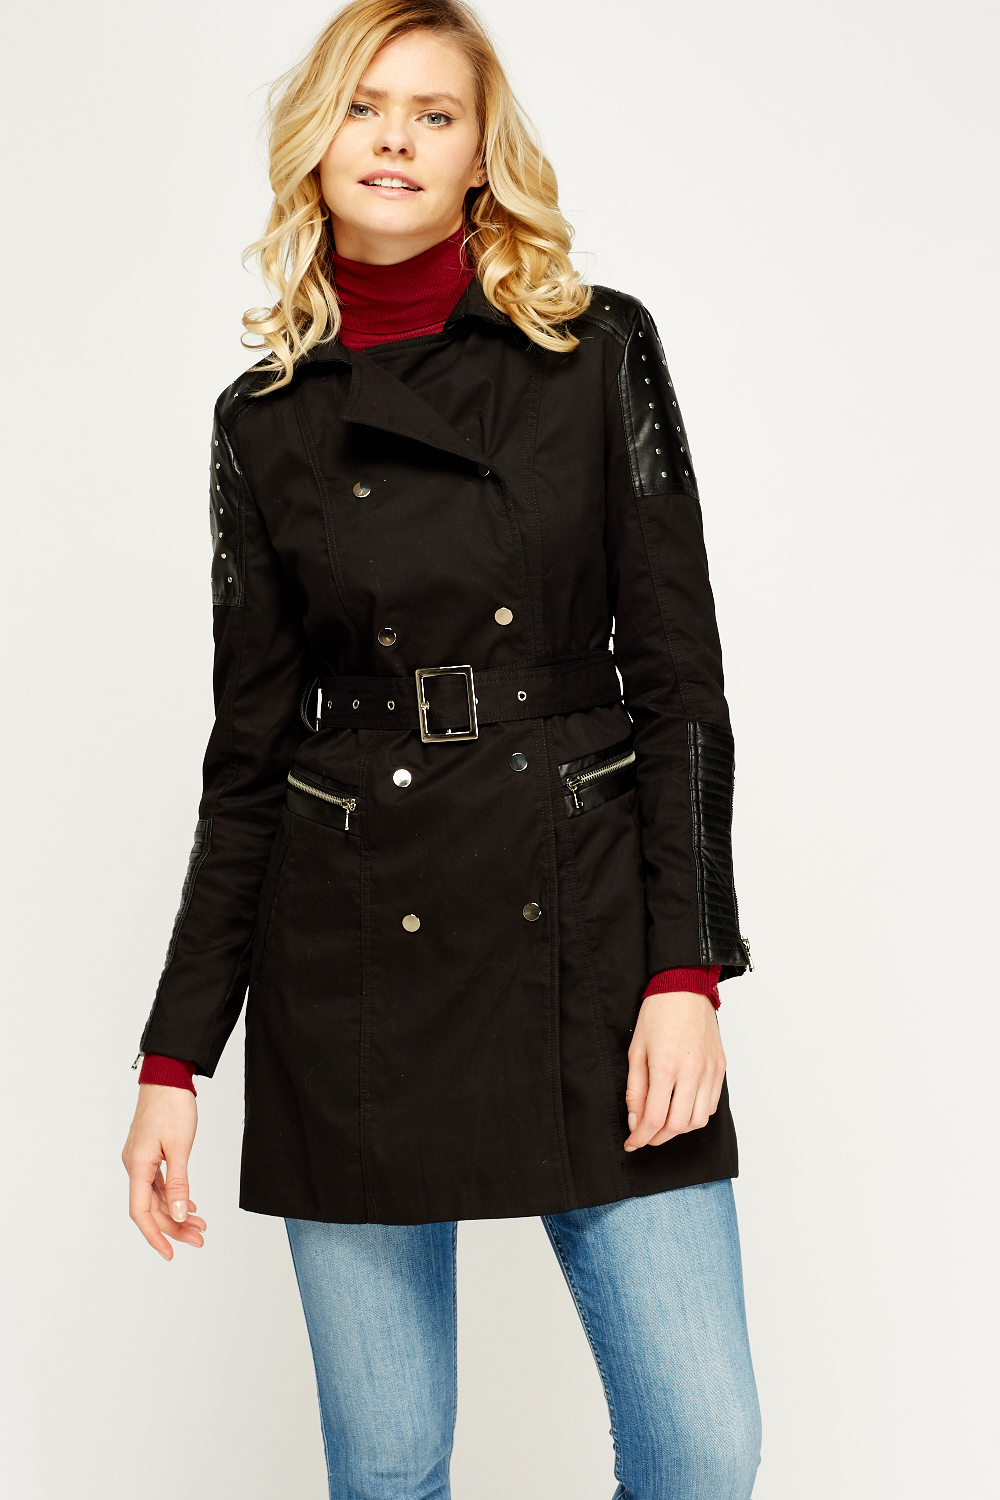 Studded Faux Leather Shoulder Trench Coat - Just $7